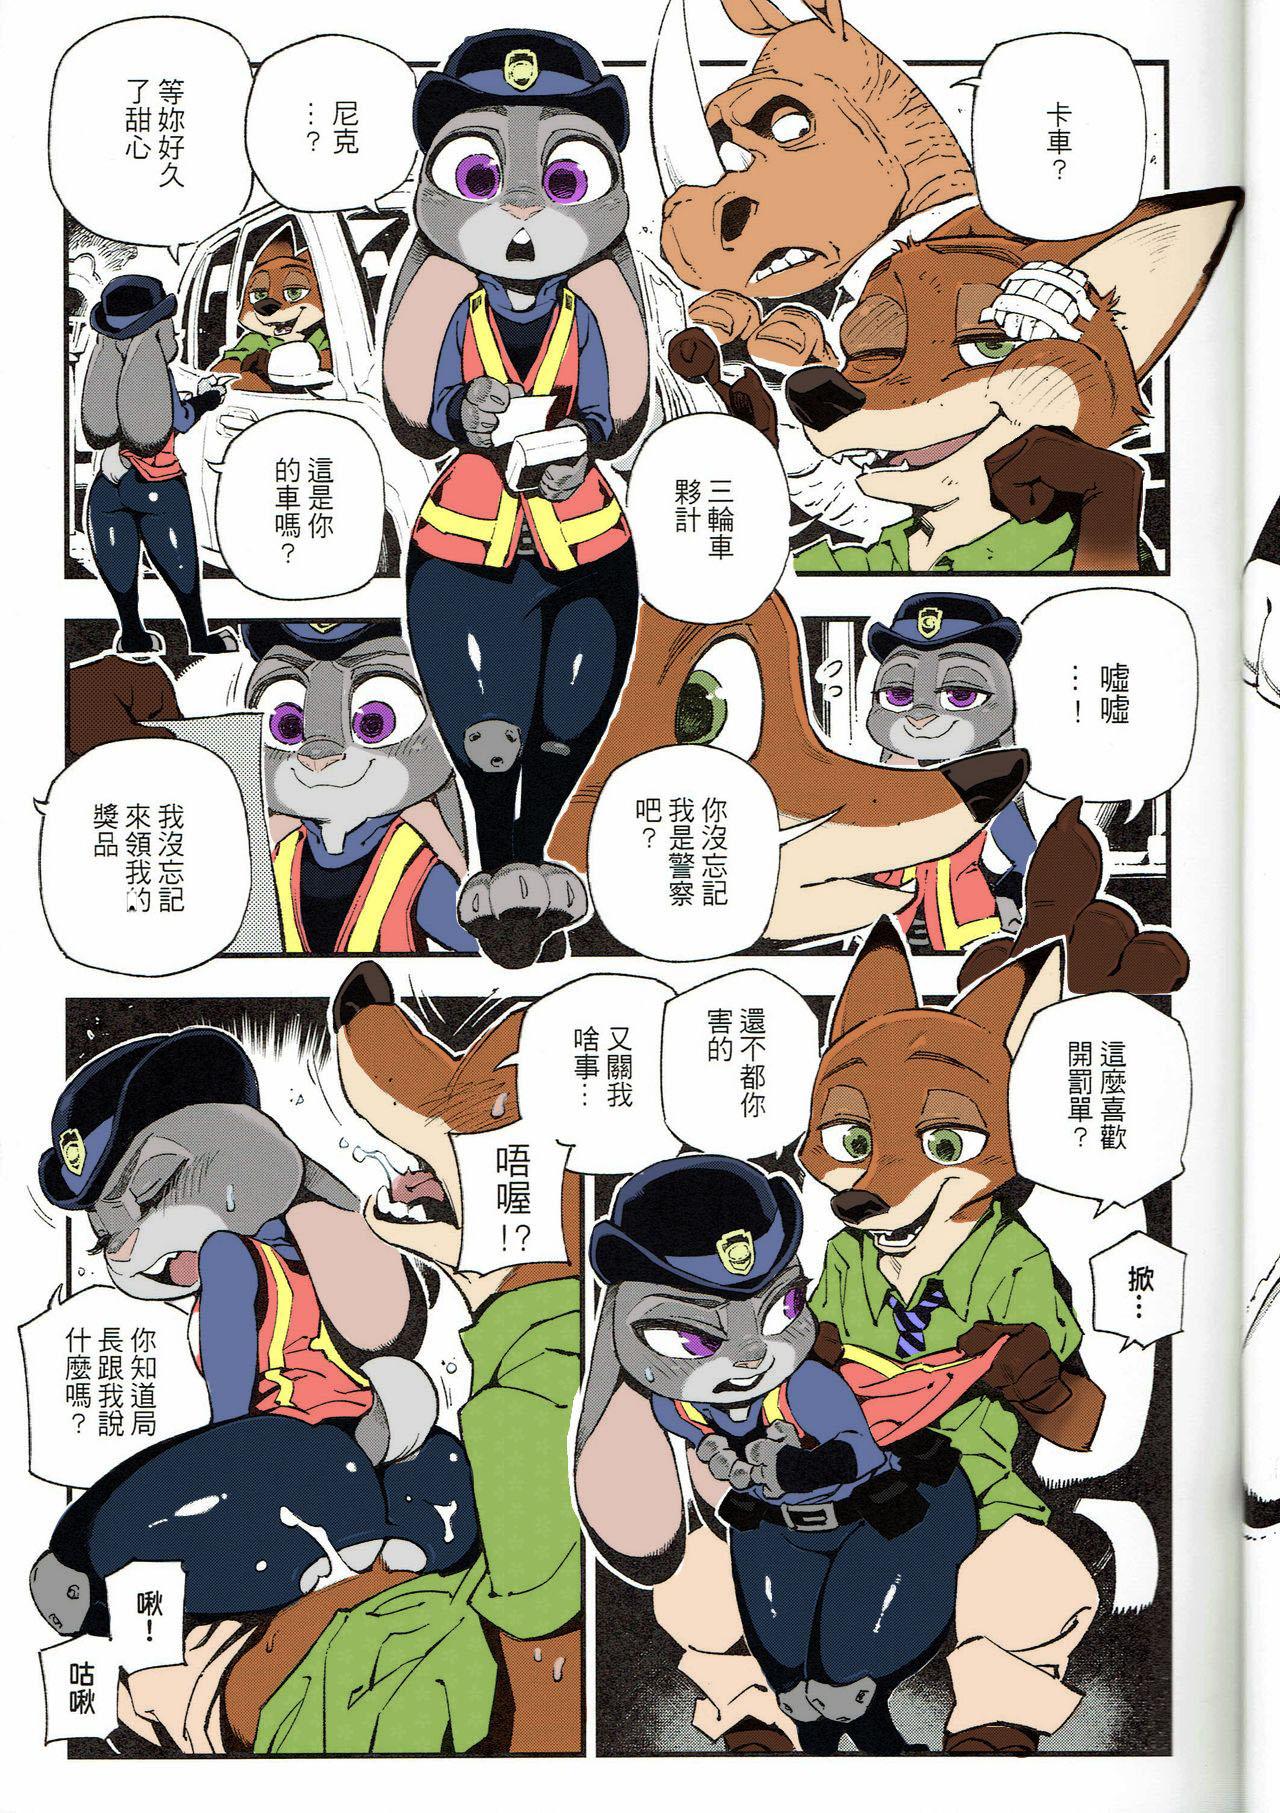 Wam What Does The Fox Say? - Zootopia European Porn - Page 11